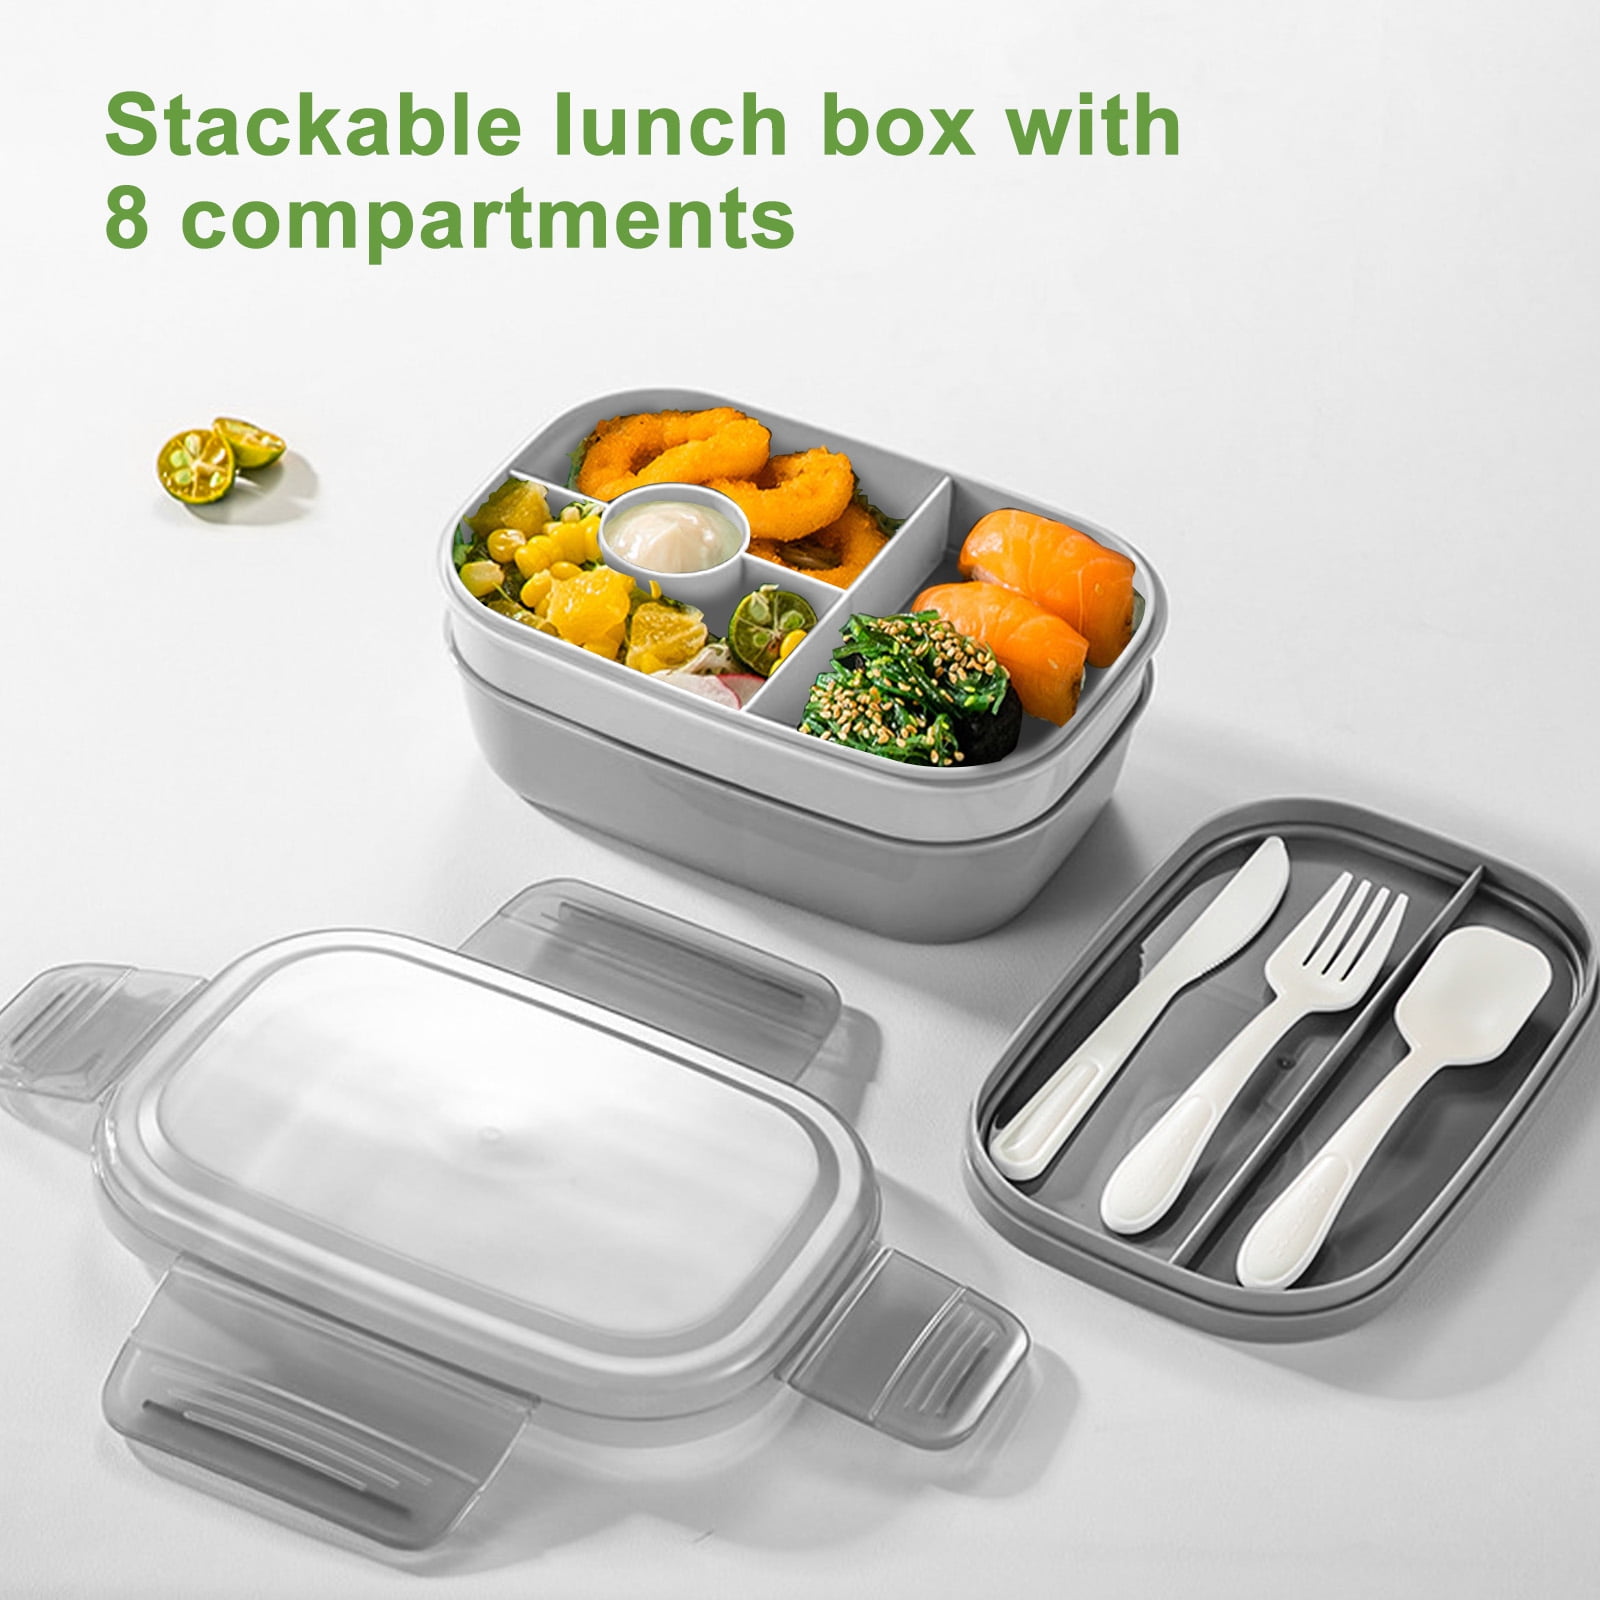 Teemars Stackable Lunch Container,Leakproof Adult Bento Lunch Box 40-oz,4-Compartment Tray,4-oz Sauce Cups,Built-In Reusable Spoon,BPA-Free,Microwave